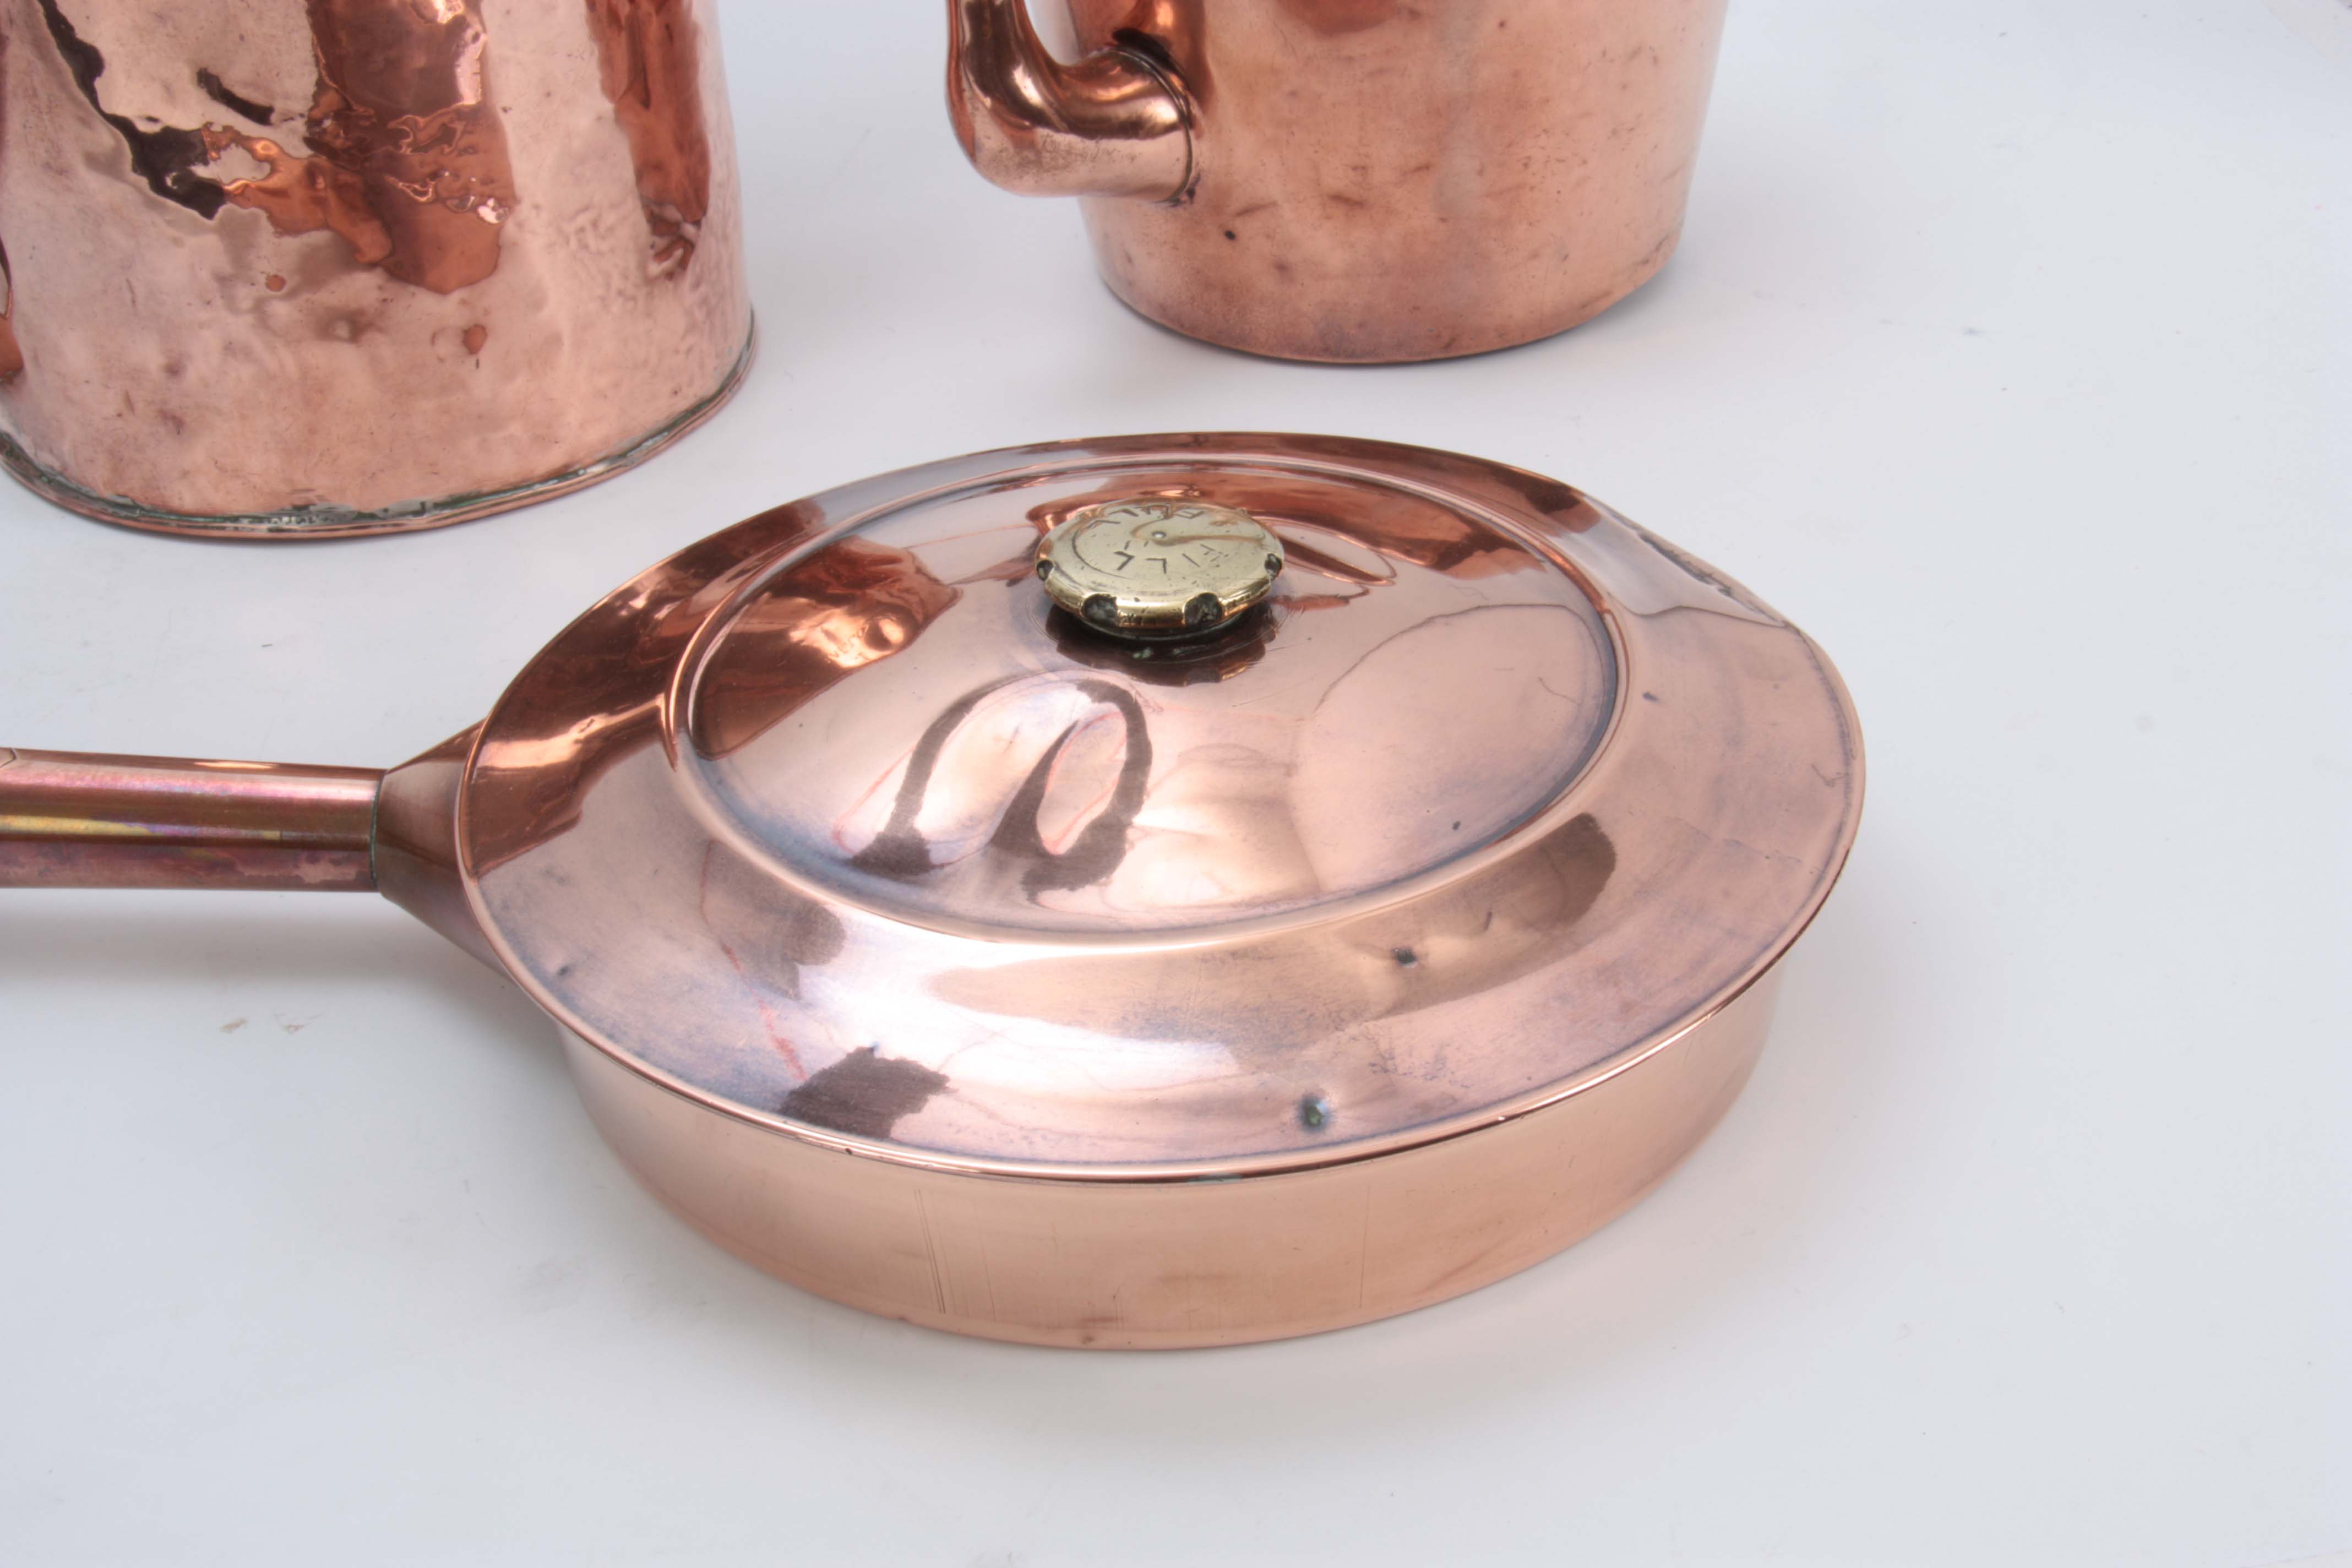 A VICTORIAN CYLINDRICAL GALLON COPPER MEASURE, A VICTORIAN CIRCULAR COPPER KETTLE, A COPPER ALE MULL - Image 2 of 6